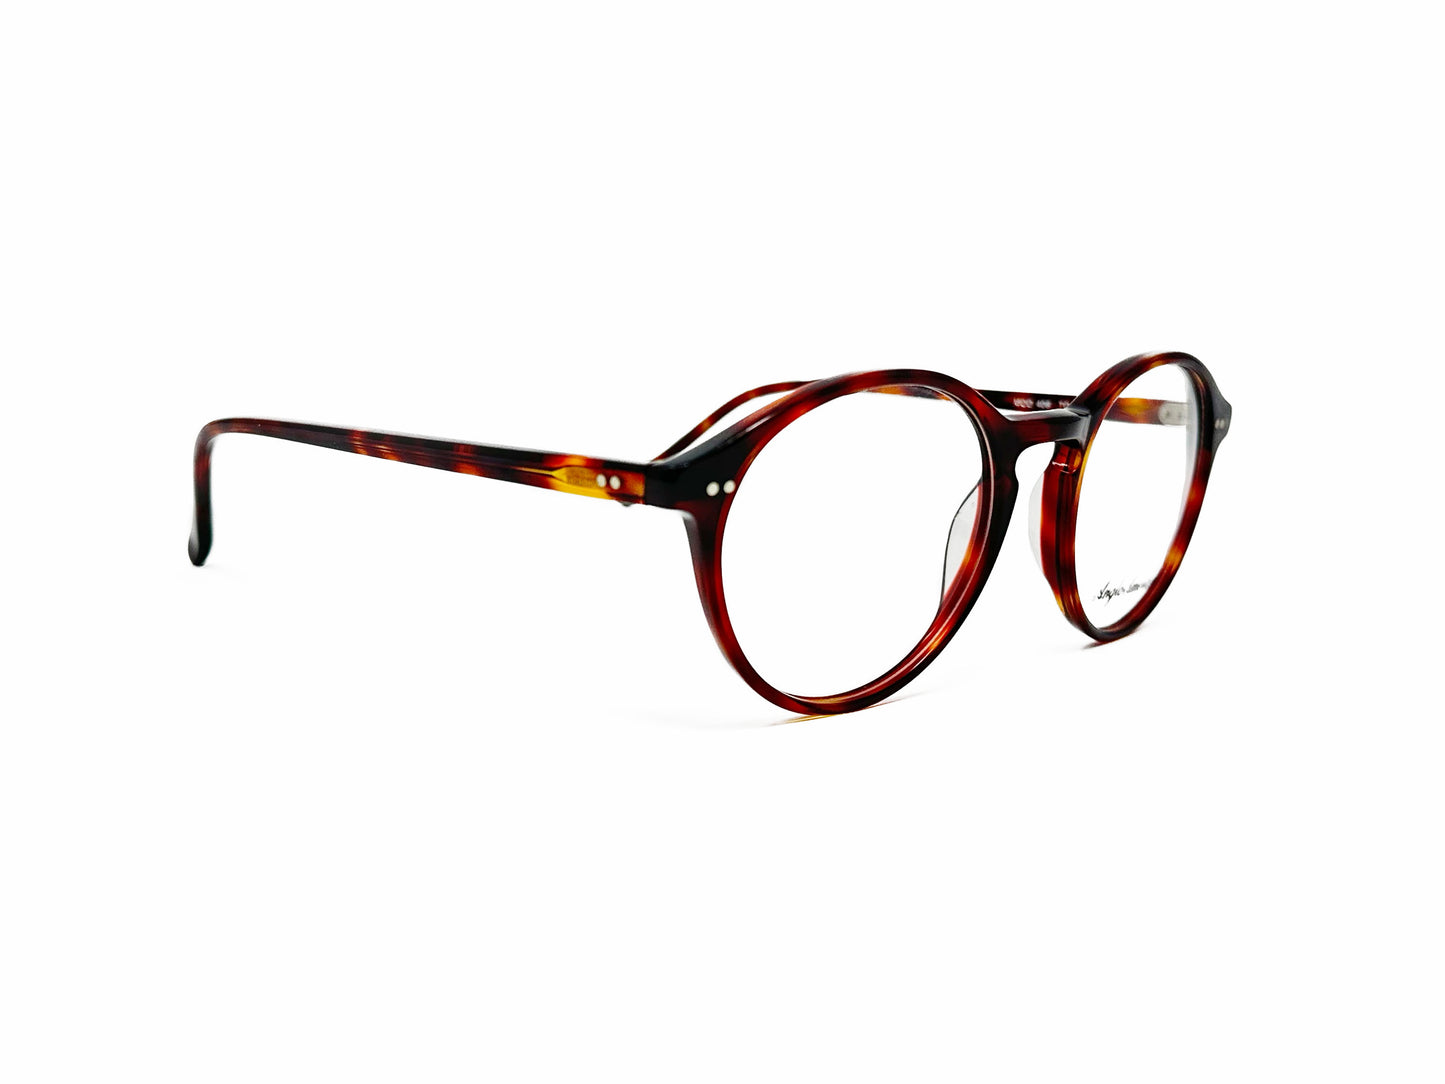 Anglo American Optical round acetate frame. Model: 406. Color: TO tortoise. Side view.